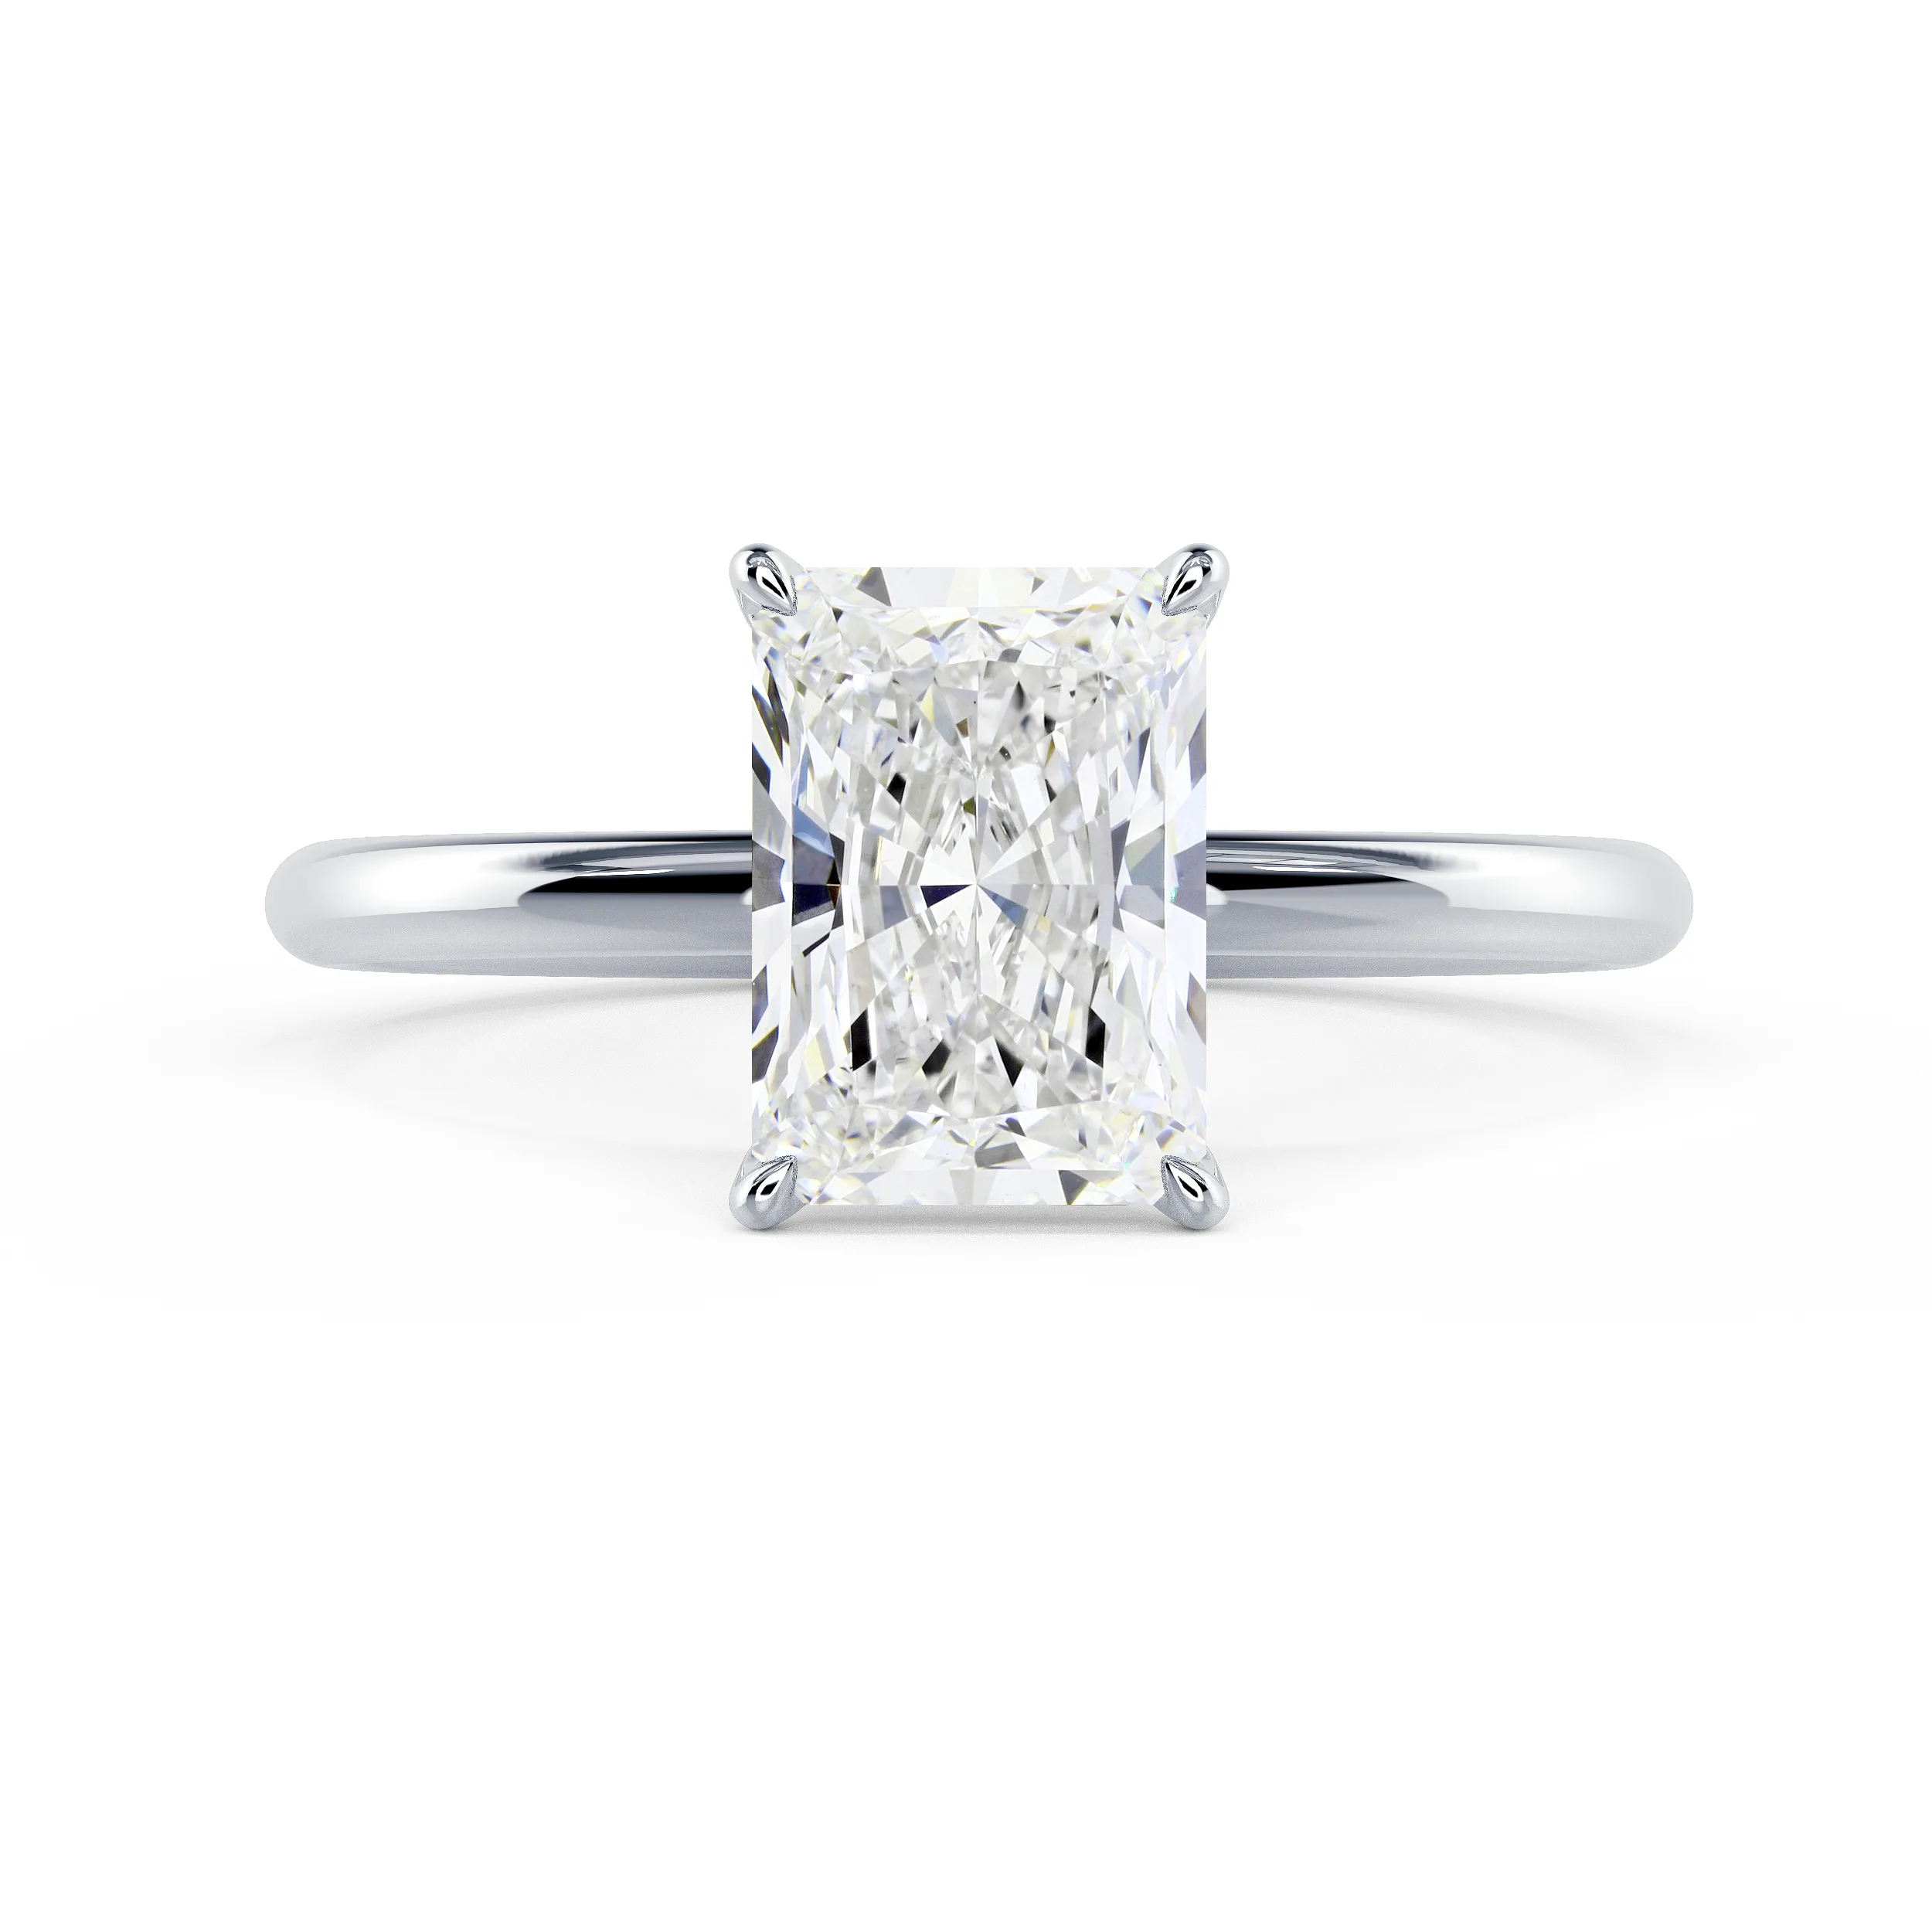 Synthetic Diamonds set in White Gold Radiant Petite Four Prong Solitaire Diamond Engagement Ring (Main View)